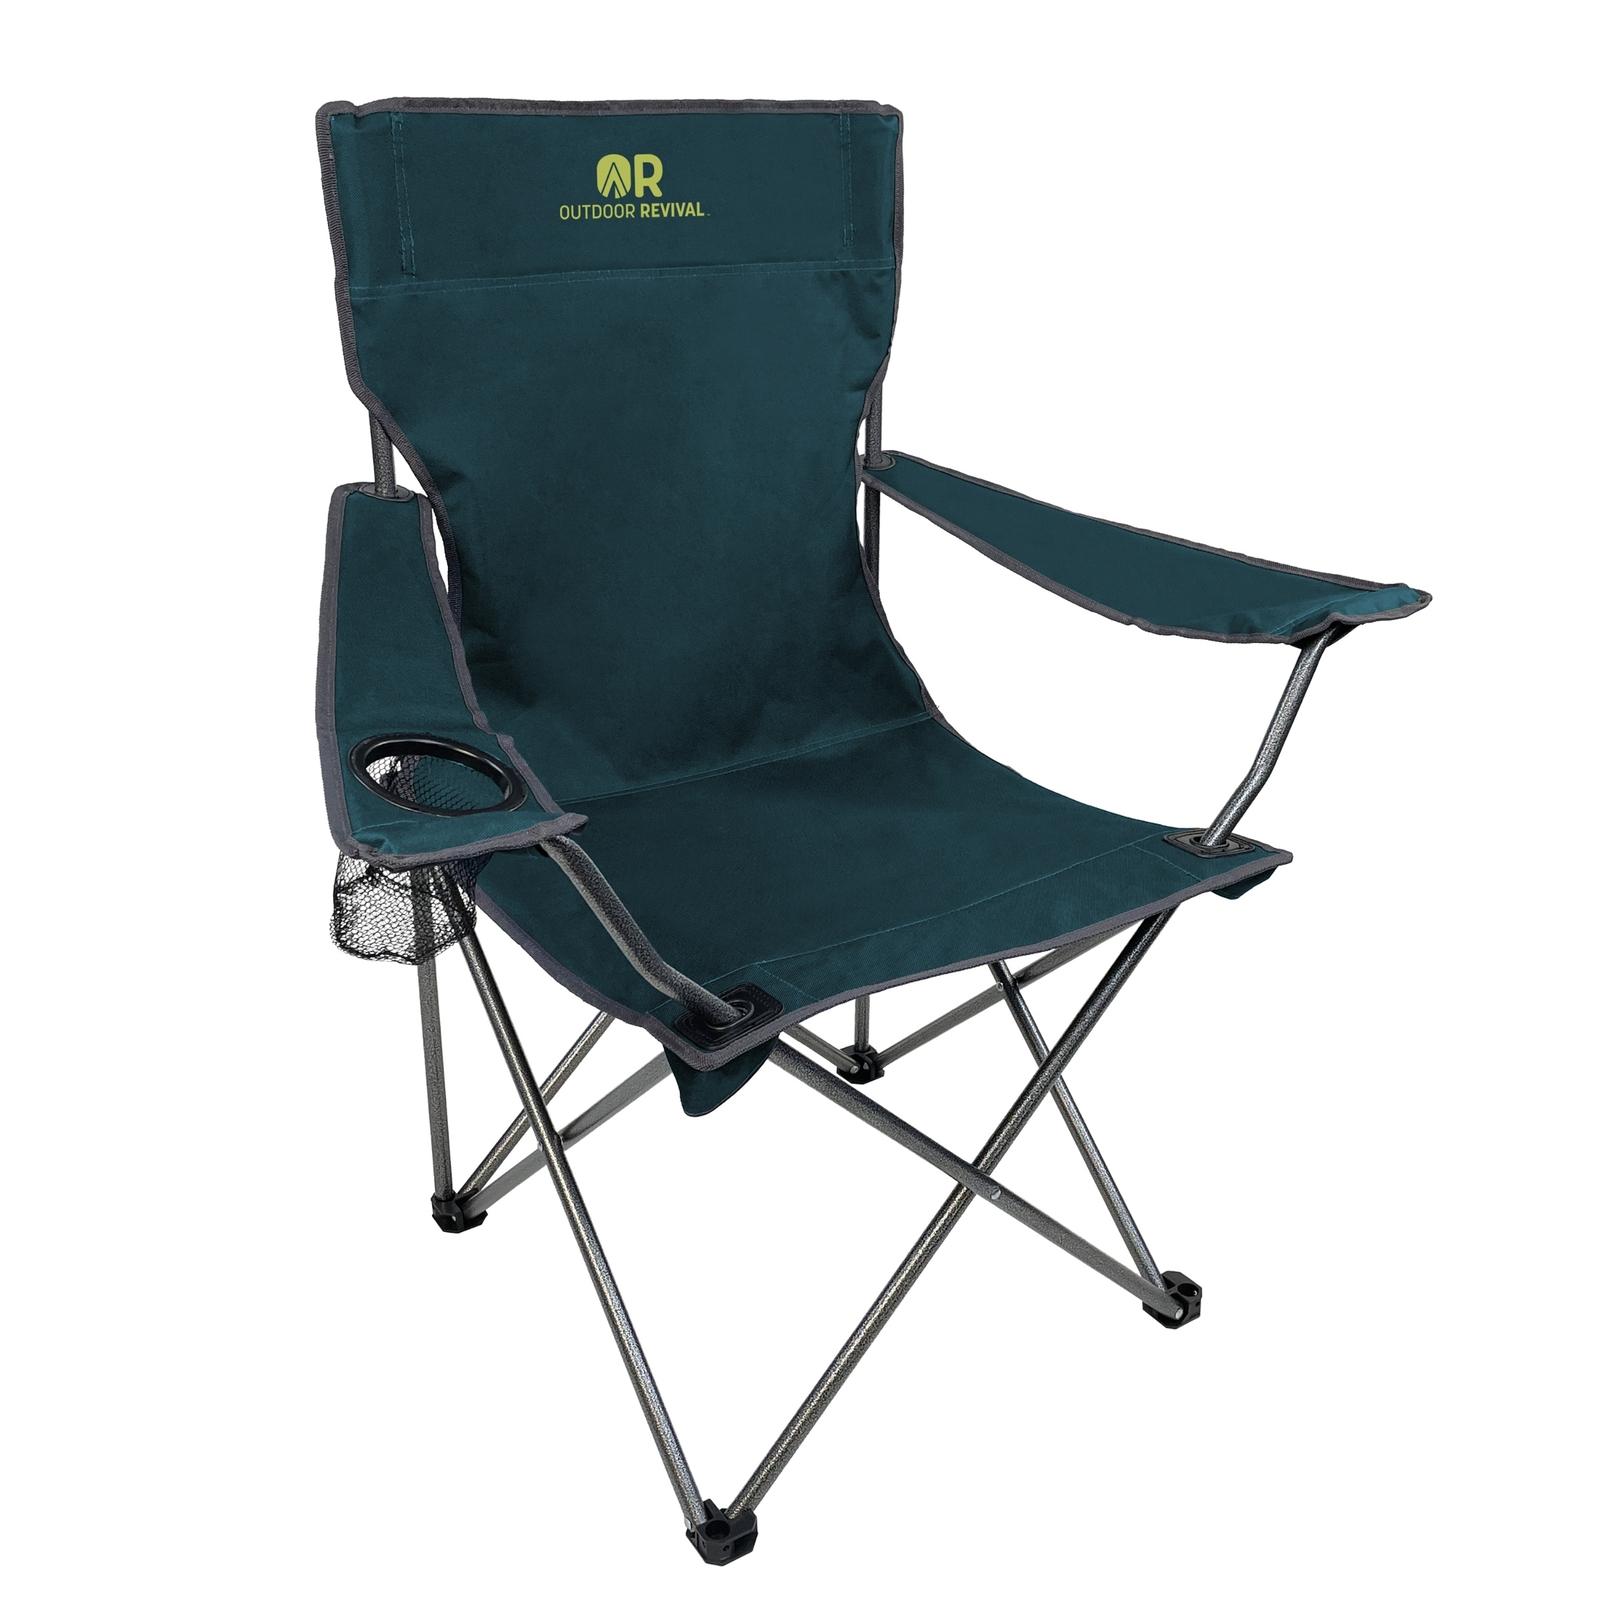 Outdoor Revival Everyday Quad Chair- semi side view